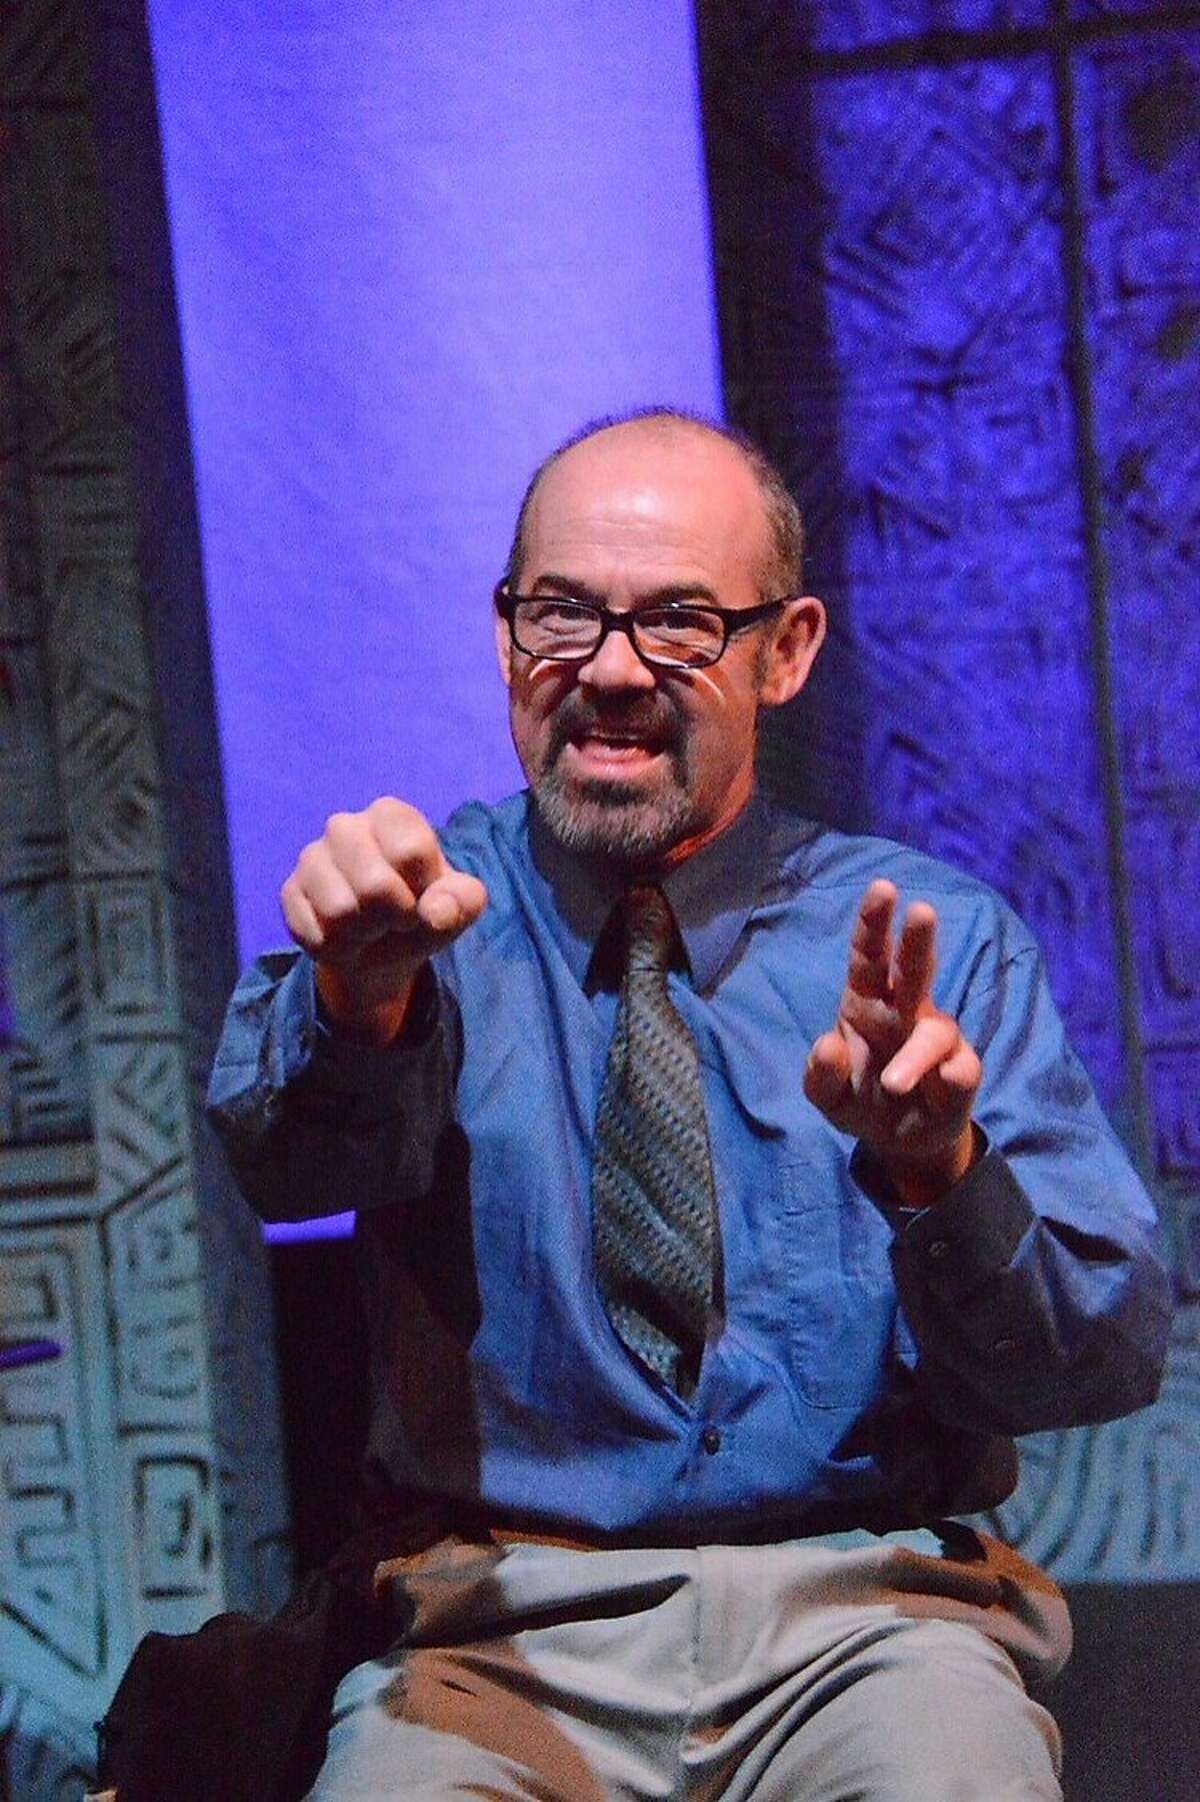 Clive Worsley as Beeson negotiates with himself in the Just Theater production of "A Maze" by Rob Handel at the Ashby Stage through March 9. Photo by Jay Yamada